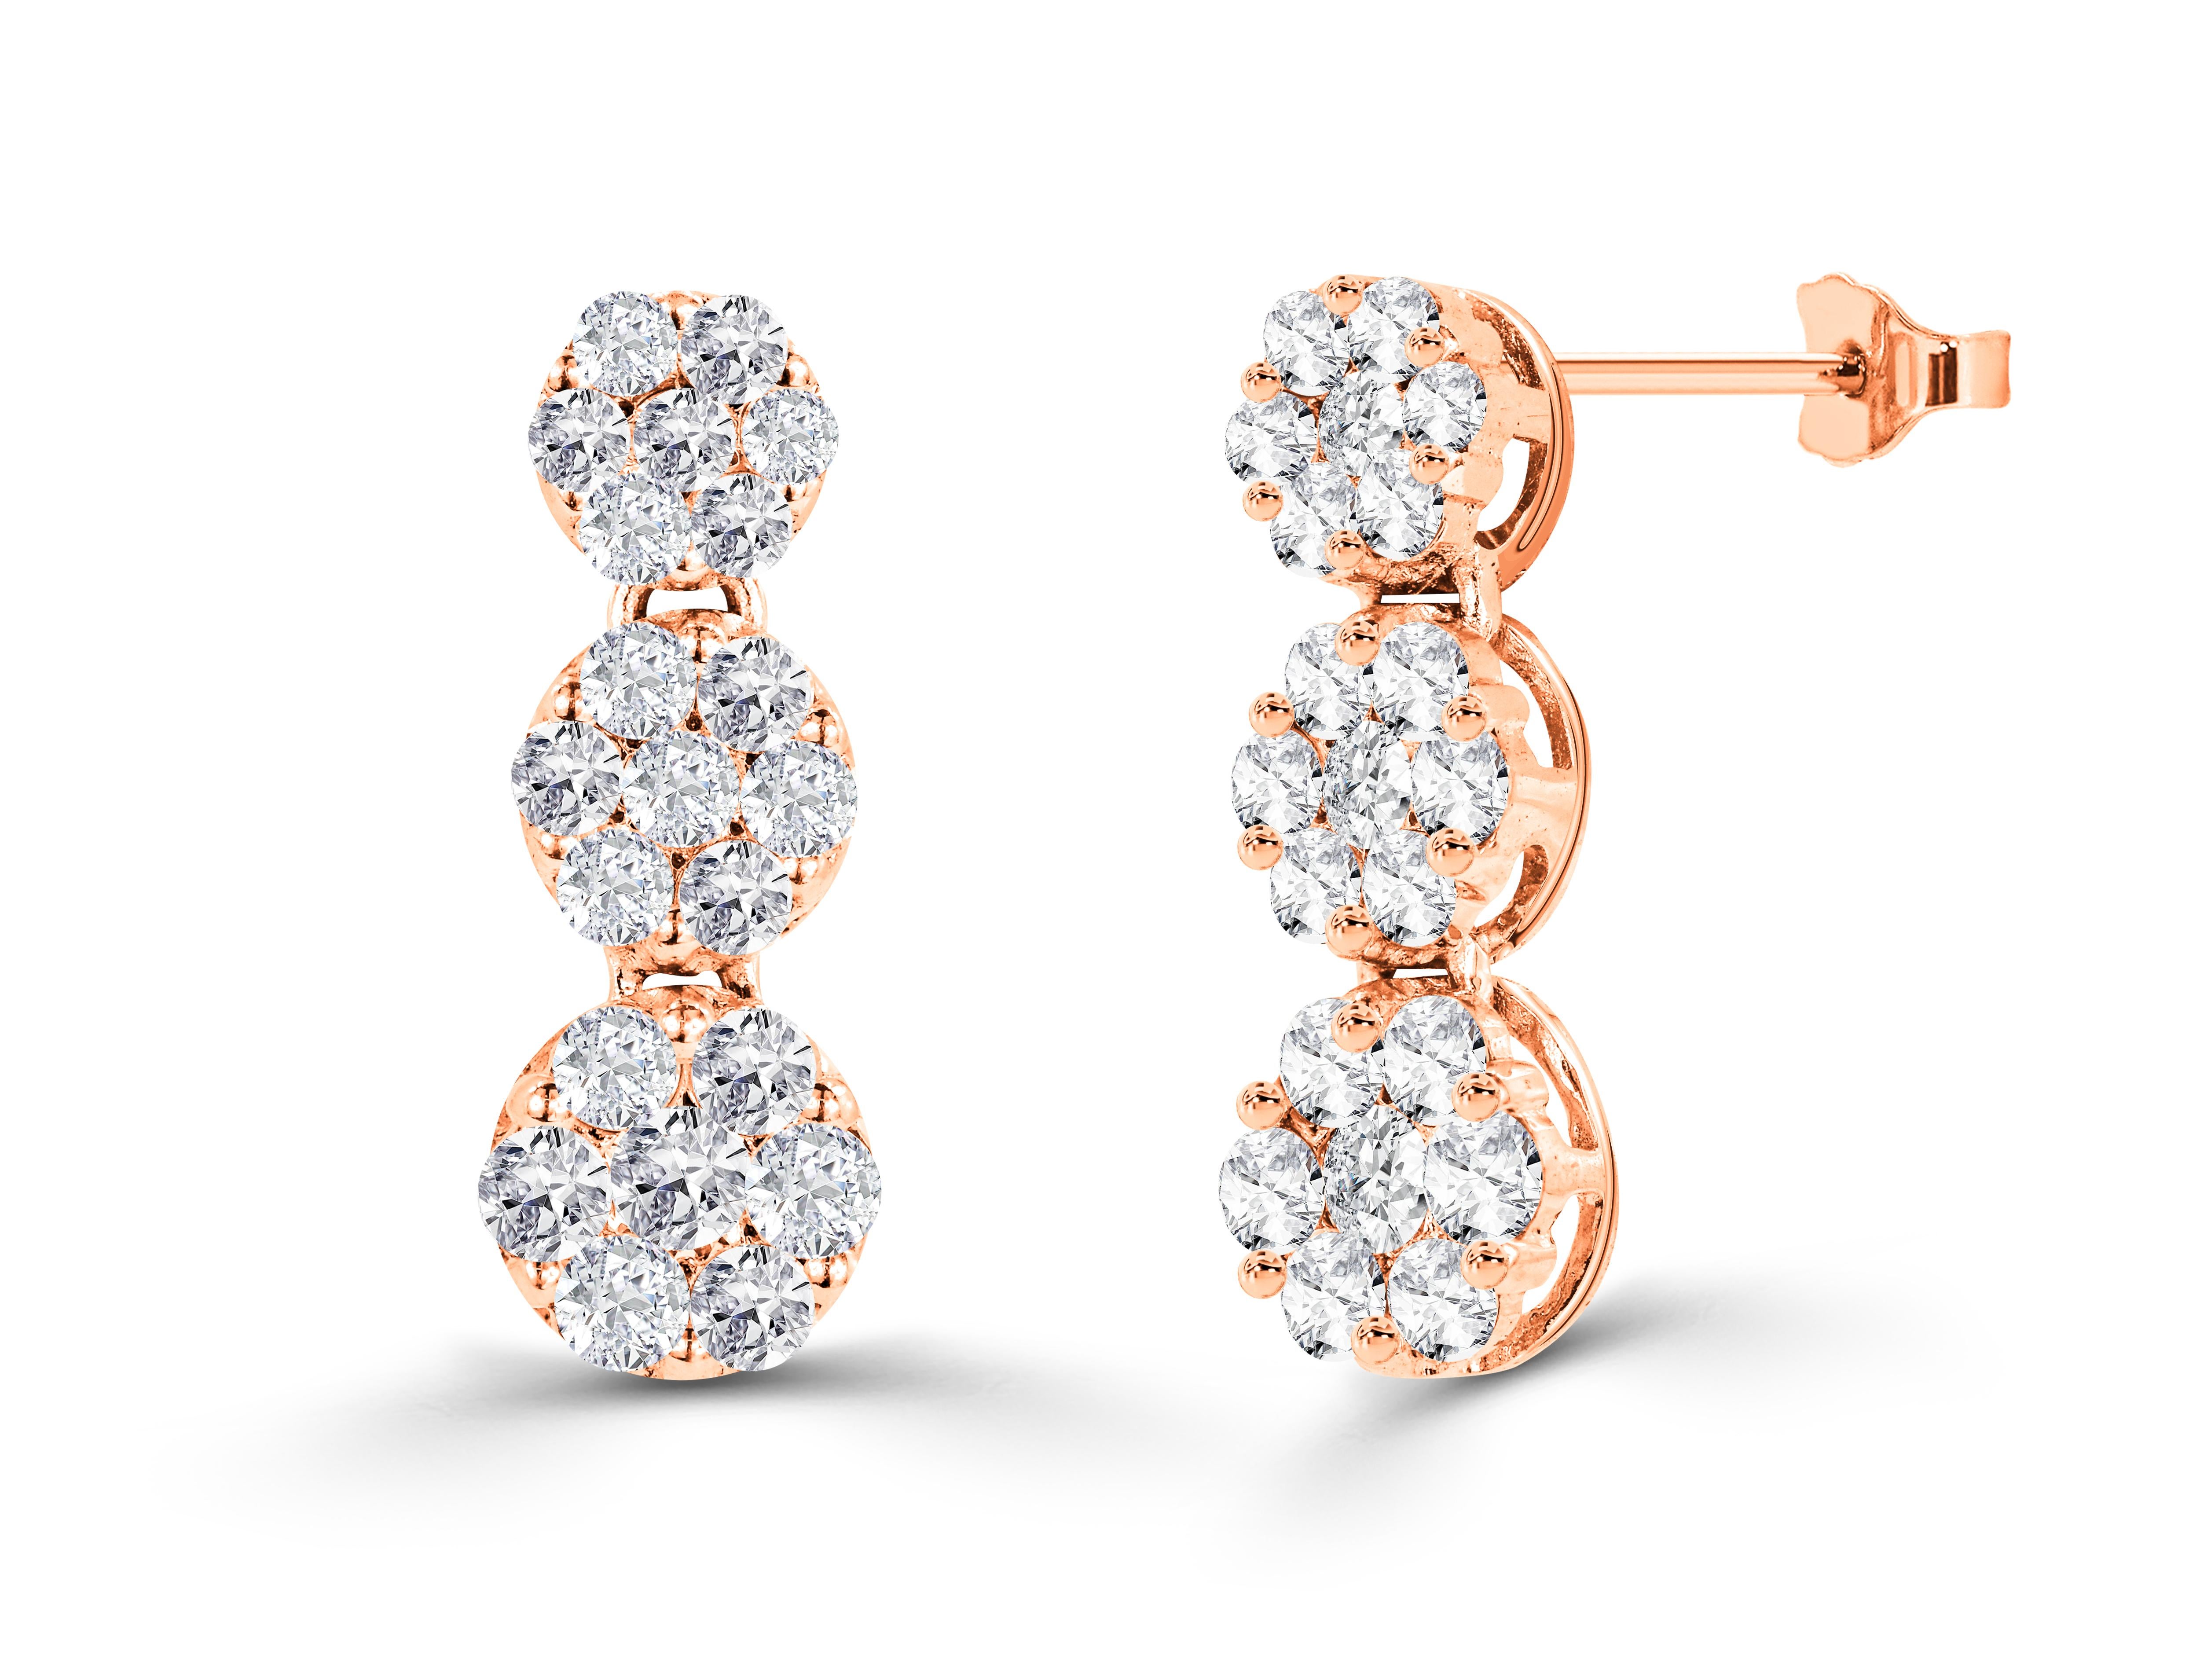 0.85 Ct Diamond Flower Drop Earrings in 18K Gold, Round Brilliant cut diamond earrings, Natural Diamond Earrings, Stud earrings, Heavy End Earrings.

Jewels By Tarry presents to you a beautiful Earring collection with natural diamonds that last